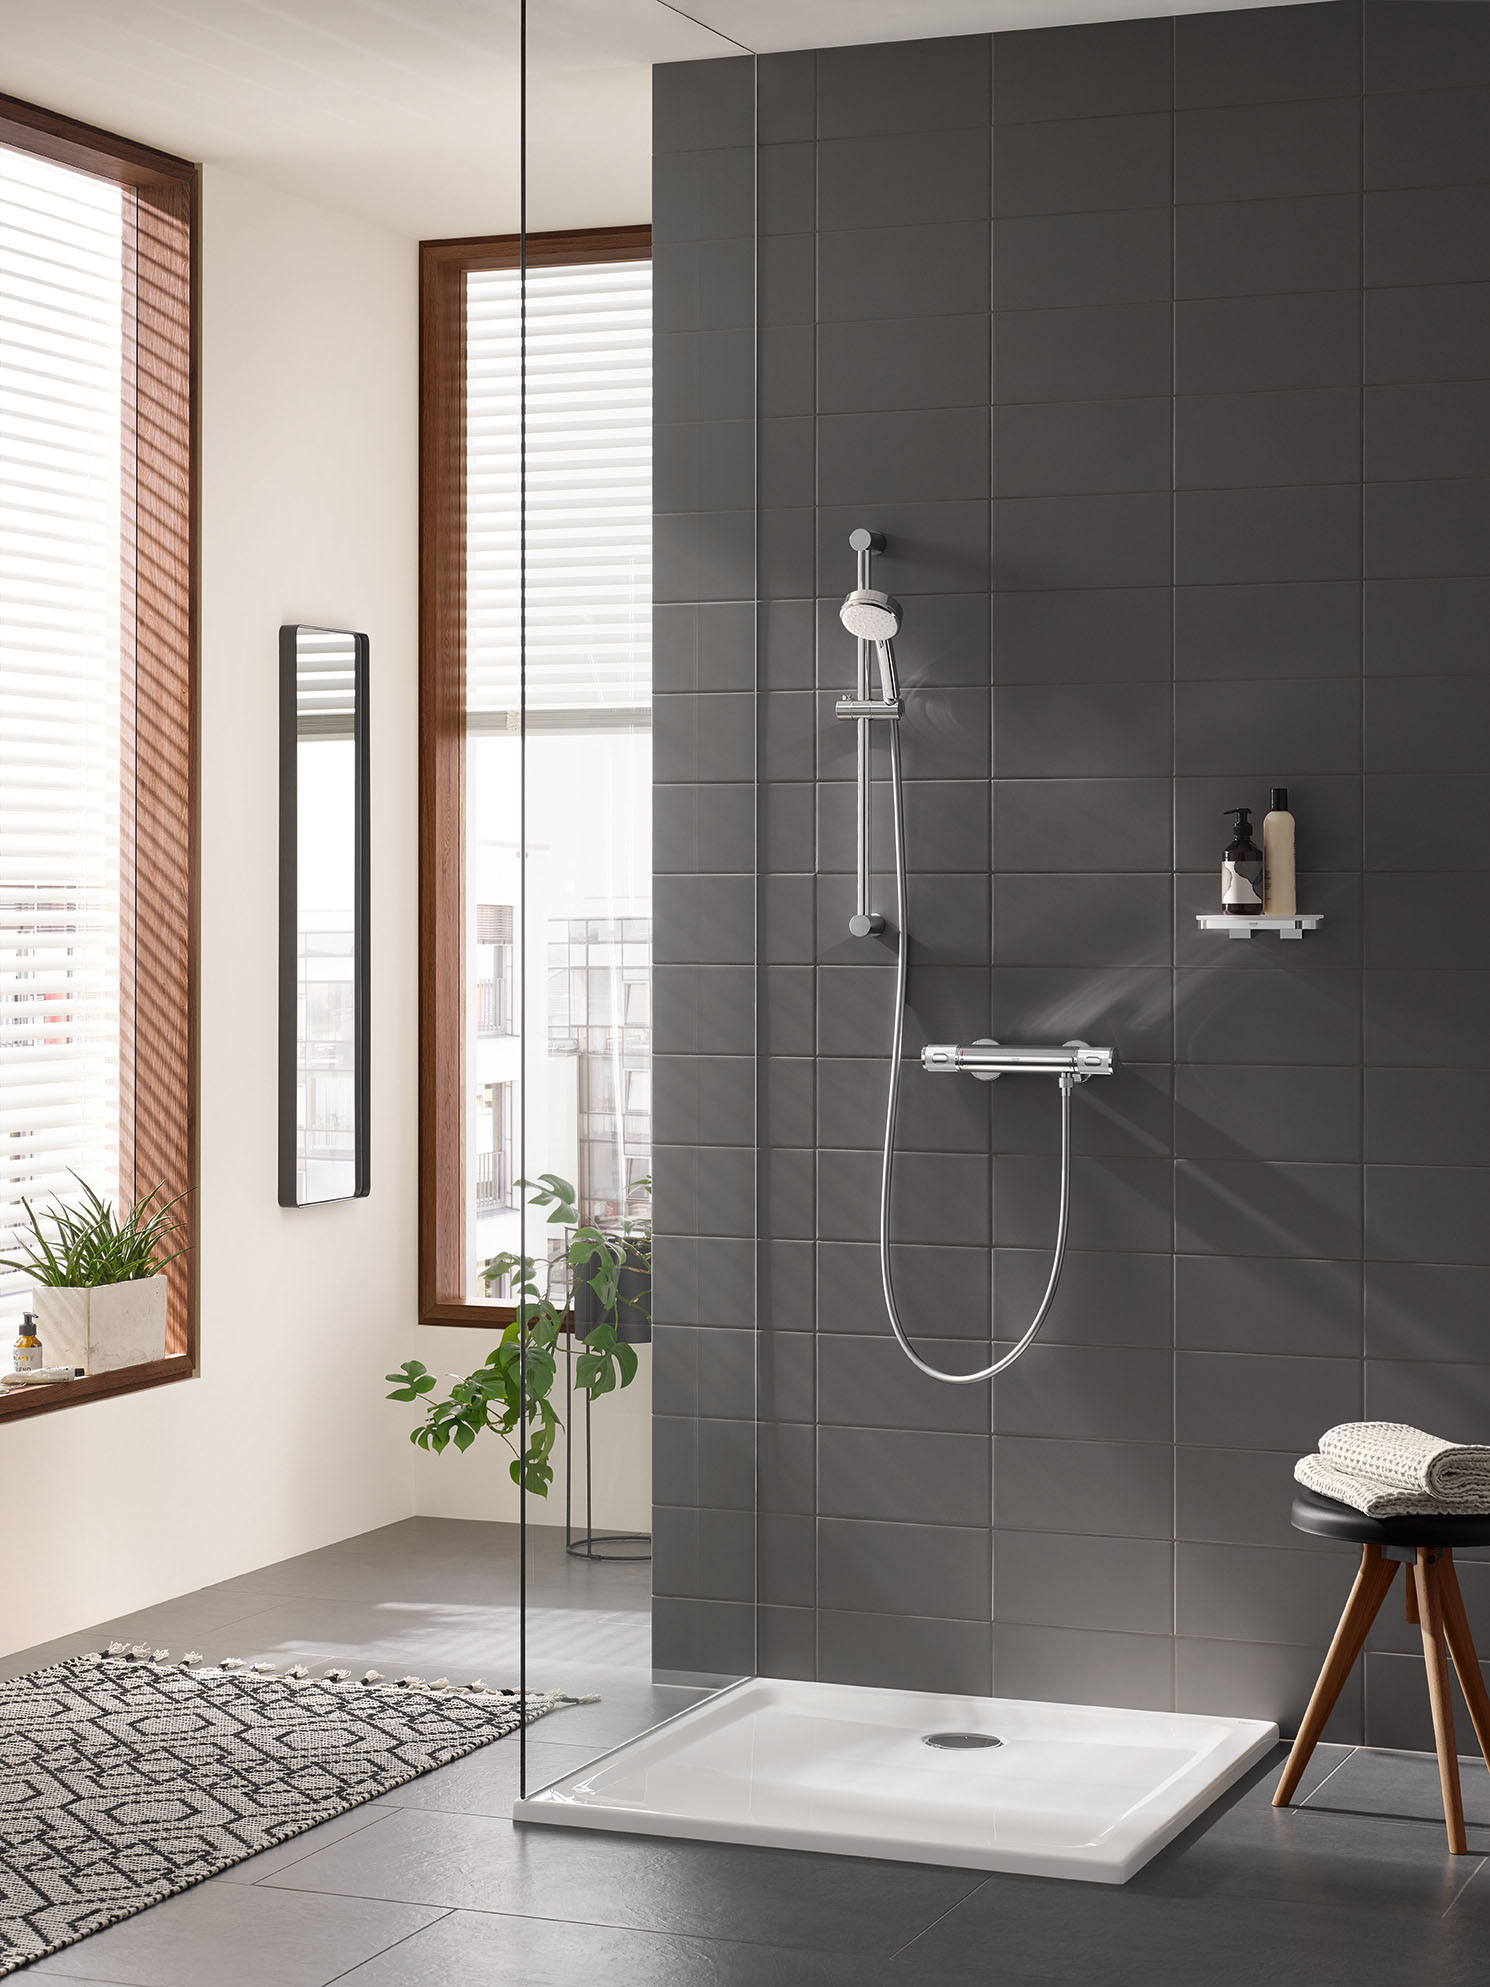 Grohe-latest-bathroom-and-kitchen-accessories-surfaces-reporter